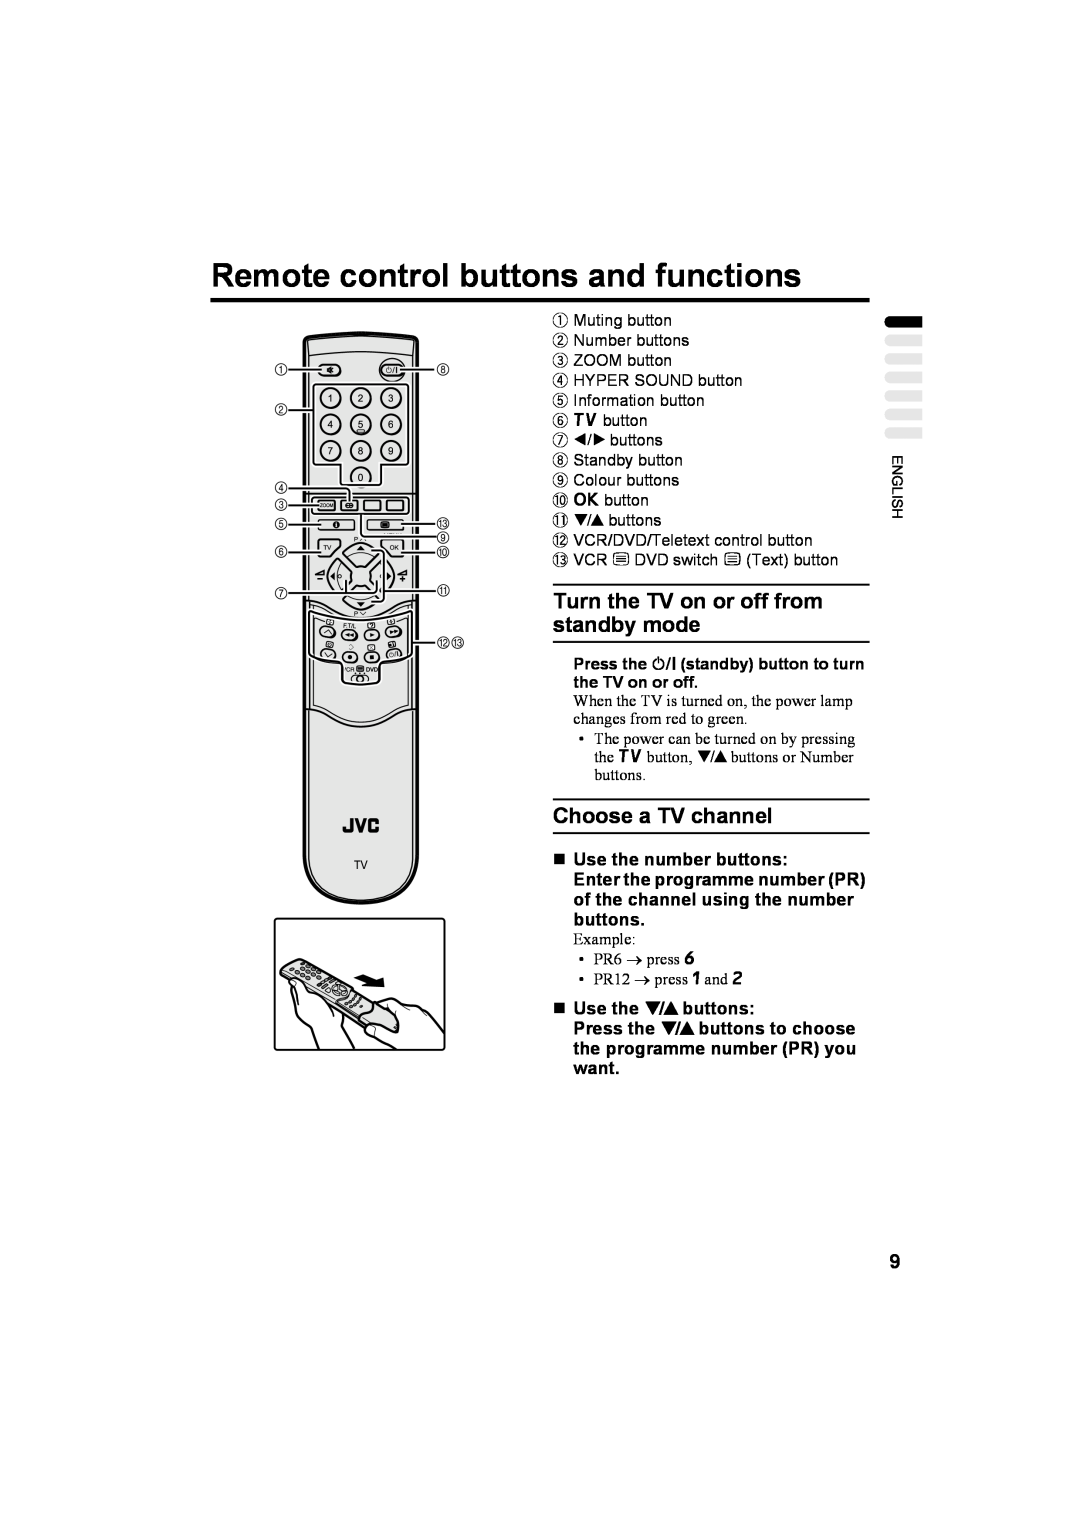 JVC AV32T20EP Remote control buttons and functions, Turn the TV on or off from, standby mode, „ Use the number buttons 